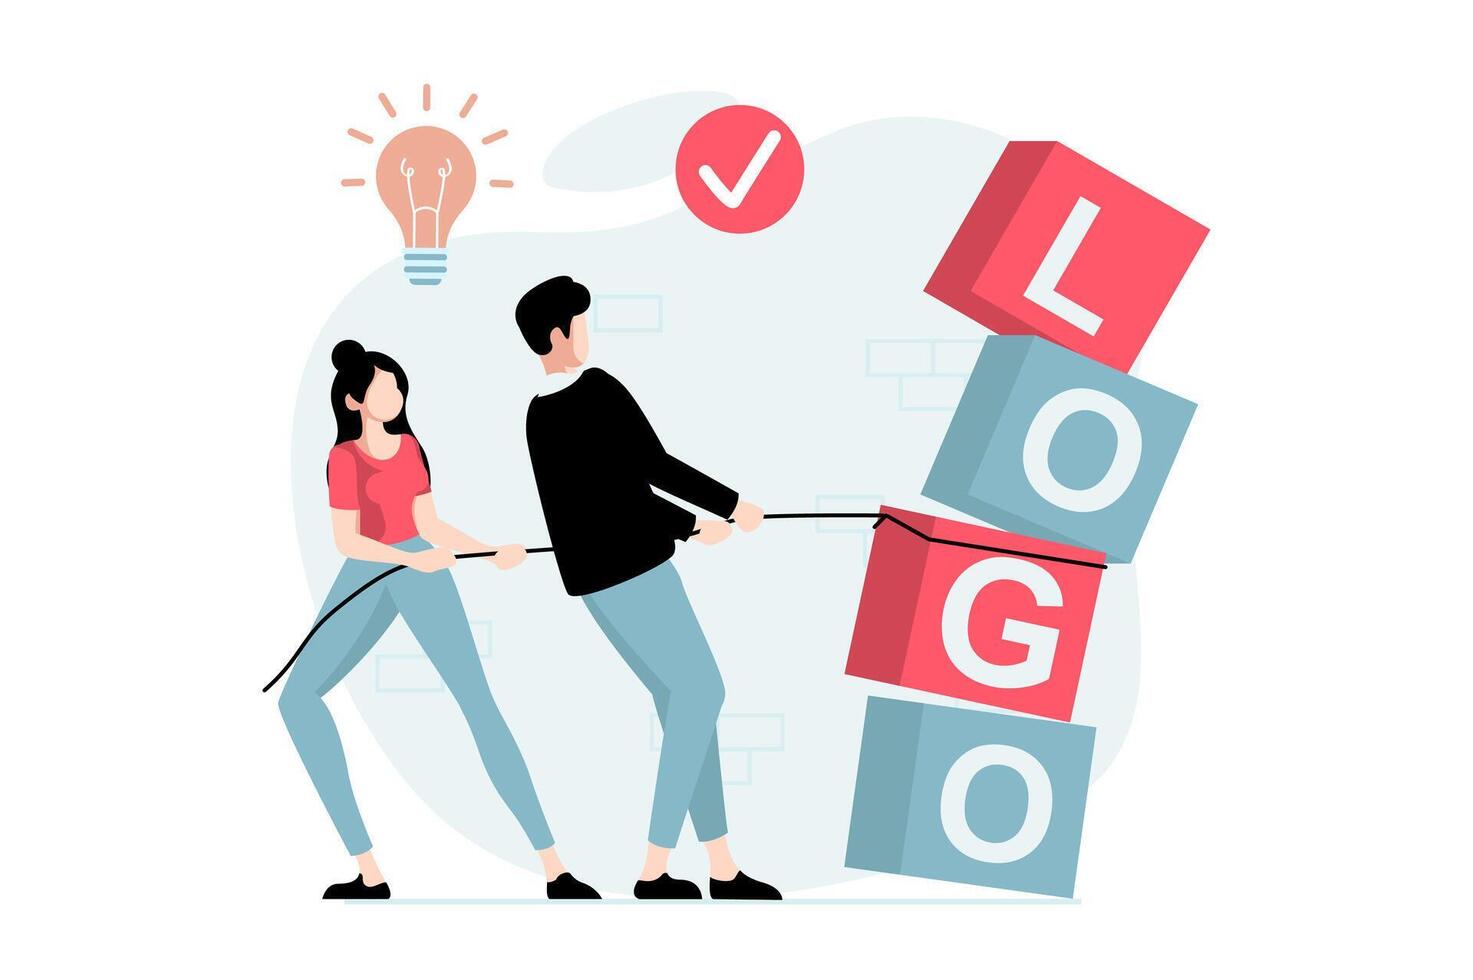 Branding team concept with people scene in flat design. Man and woman creating new logo and identity for company, developing company personality. illustration with character situation for web vector